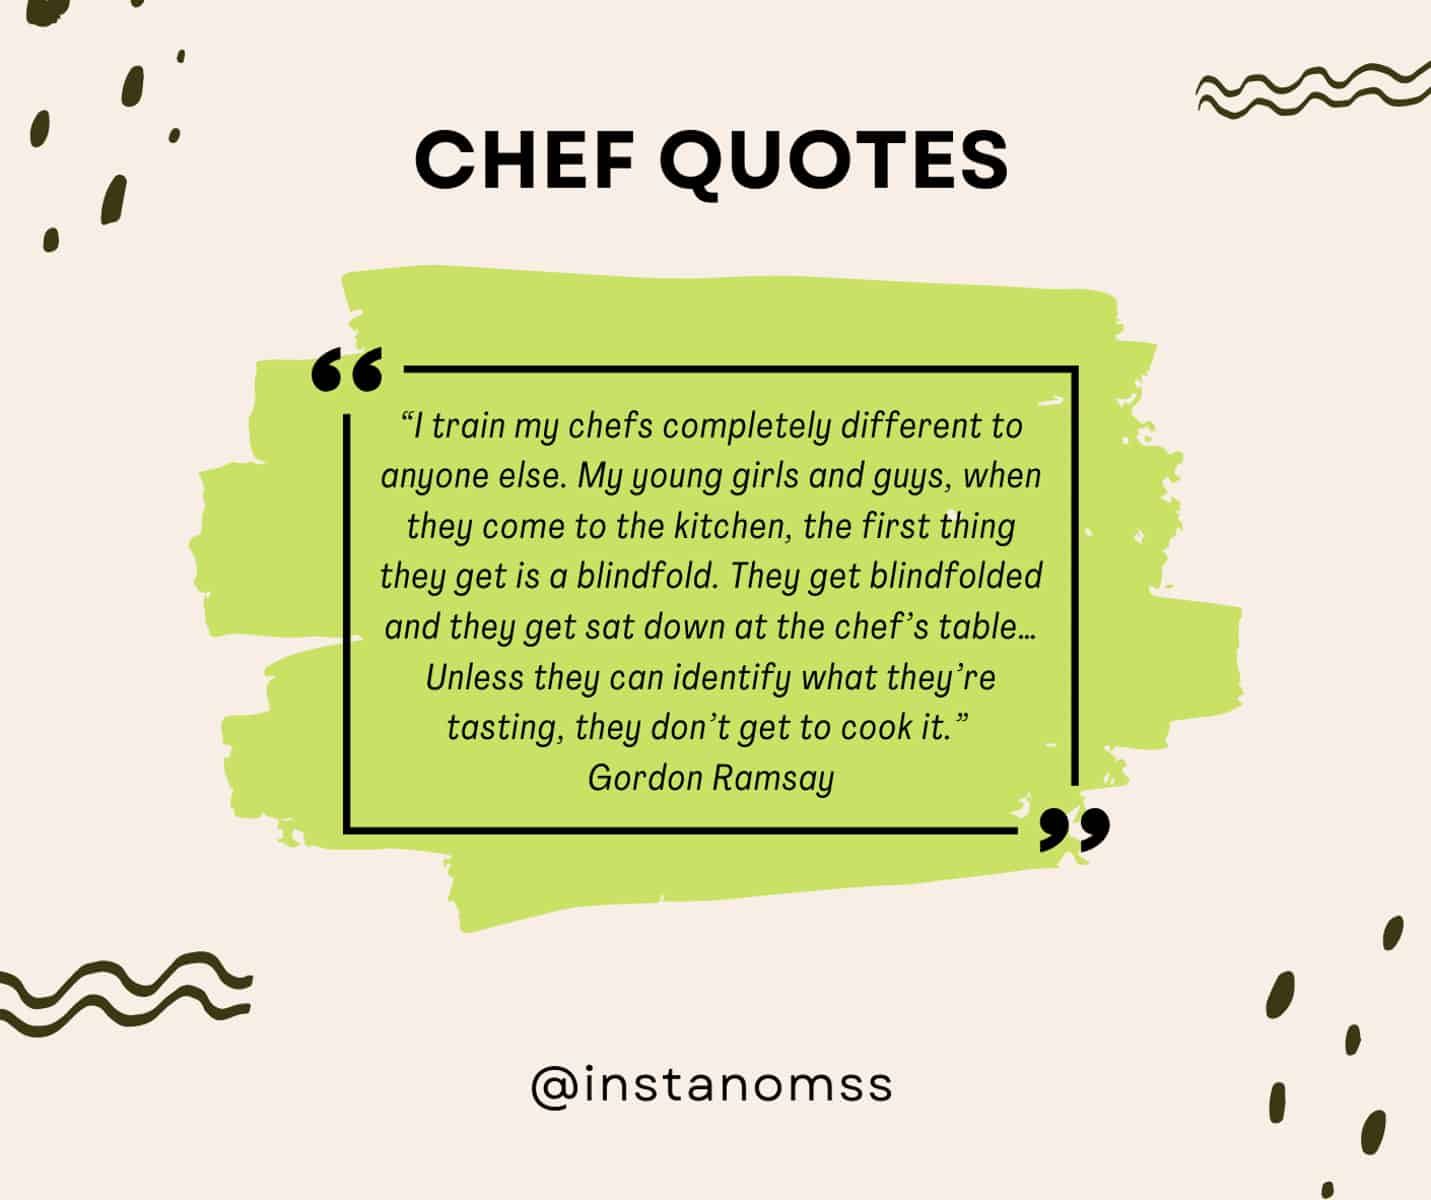 “I train my chefs completely different to anyone else. My young girls and guys, when they come to the kitchen, the first thing they get is a blindfold. They get blindfolded and they get sat down at the chef’s table… Unless they can identify what they’re tasting, they don’t get to cook it.” Gordon Ramsay